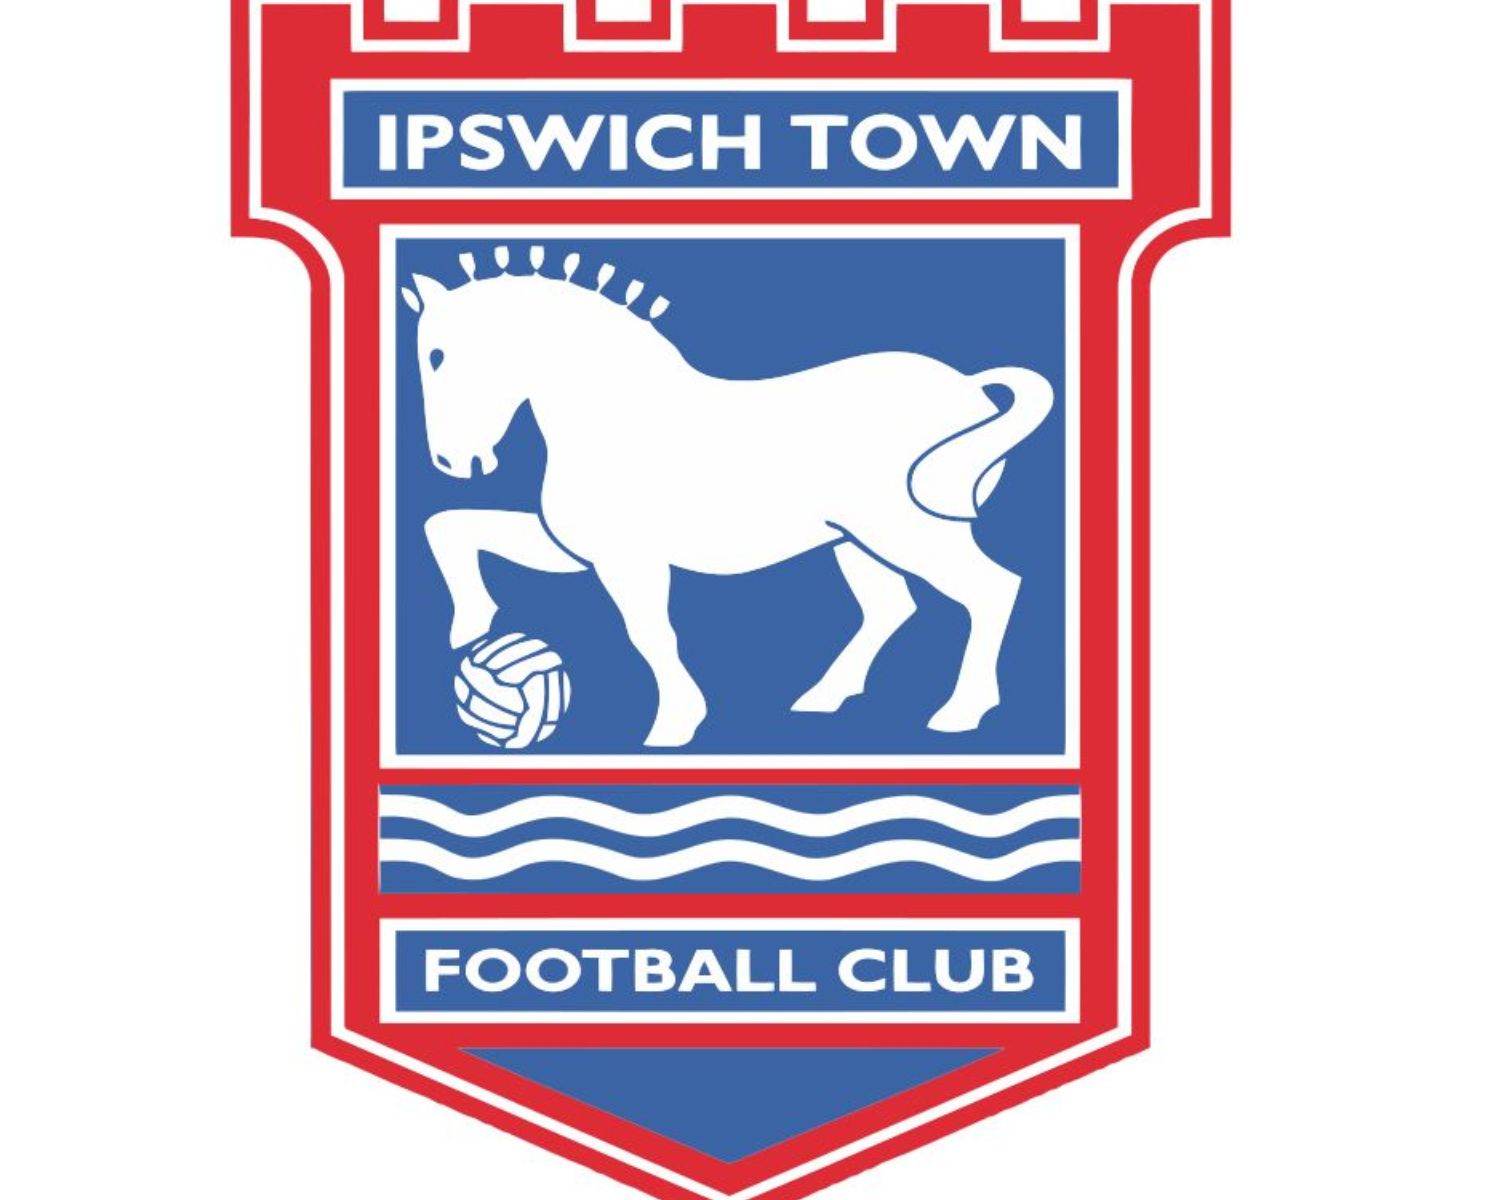 ipswich-town-fc-18-football-club-facts